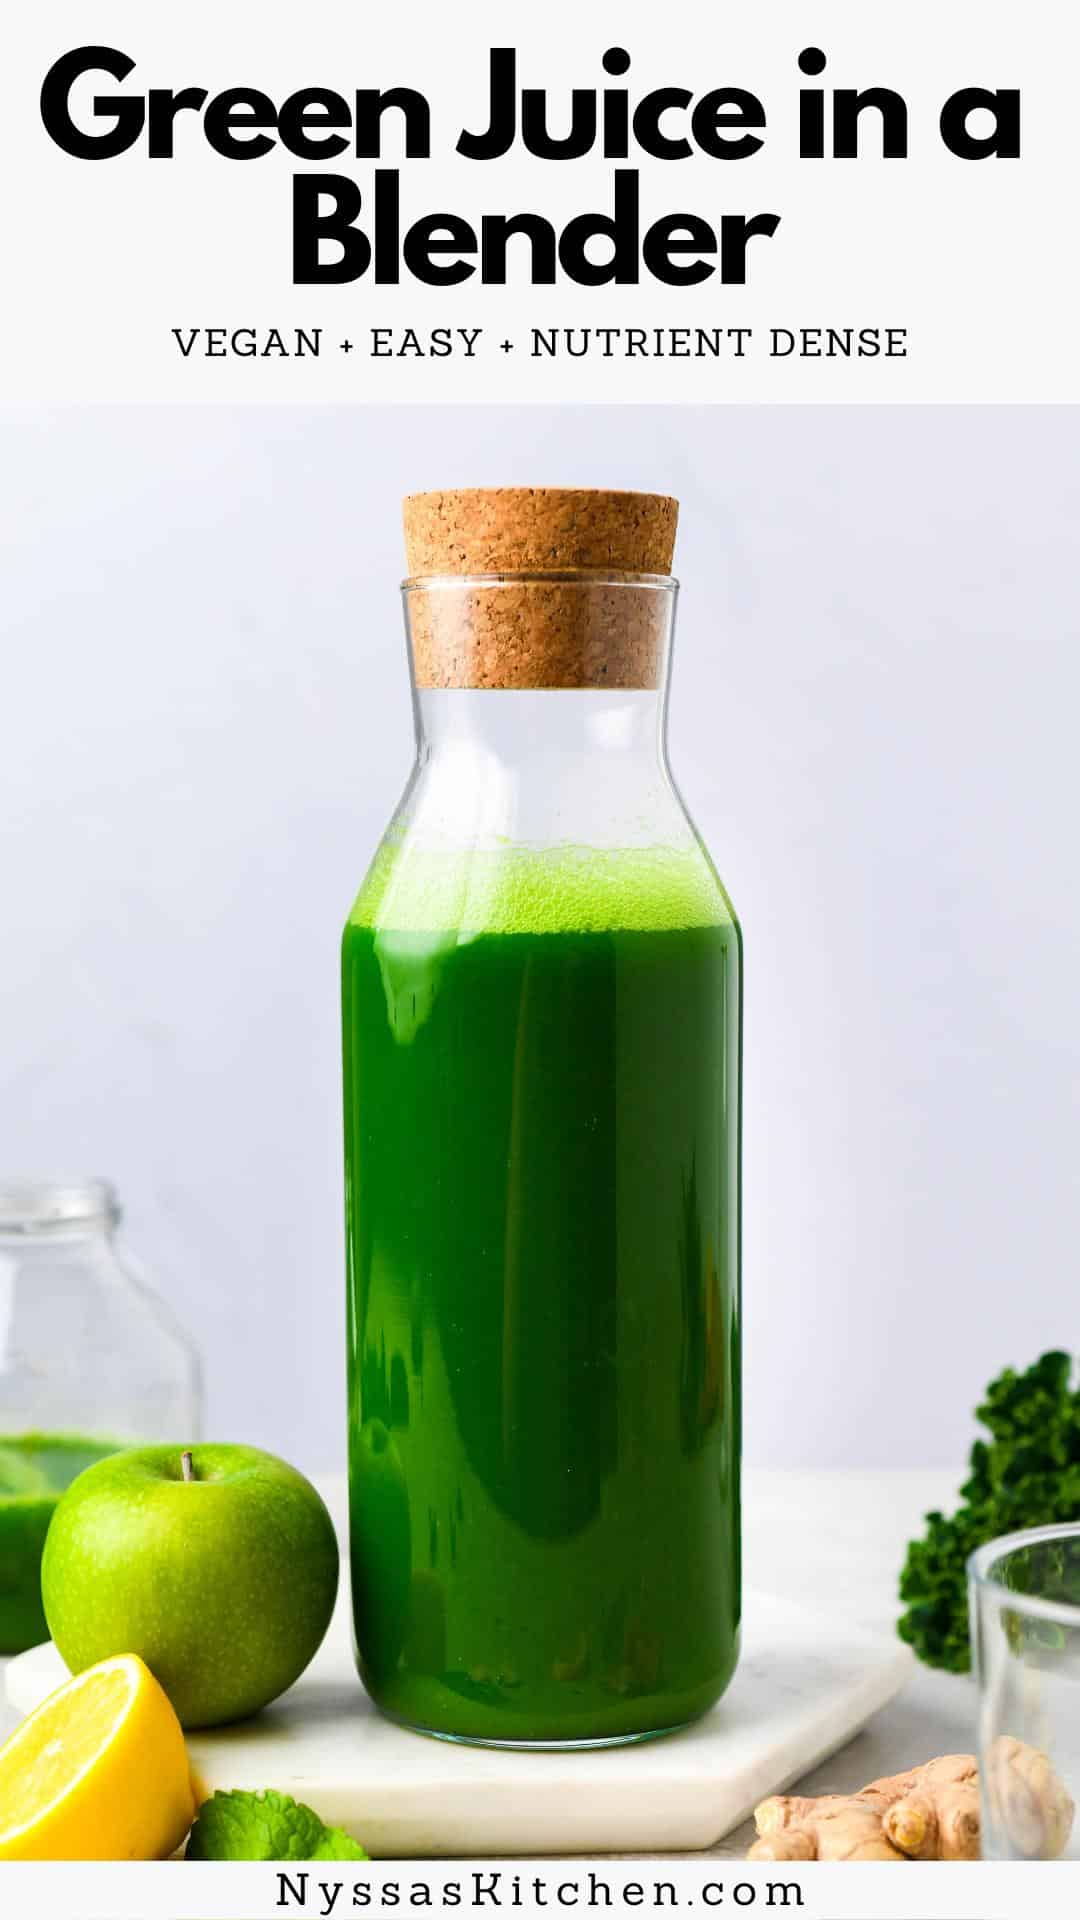 Making green juice in a blender is easier than you might think - no juicer required! This healthy green juice recipe is made with whole fruits and vegetables like kale, cucumbers, fresh mint or parsley, ginger, lemon, and apples. So nutrient dense, easy, and delicious. Vegan, gluten free, Whole30 compatible, and paleo.